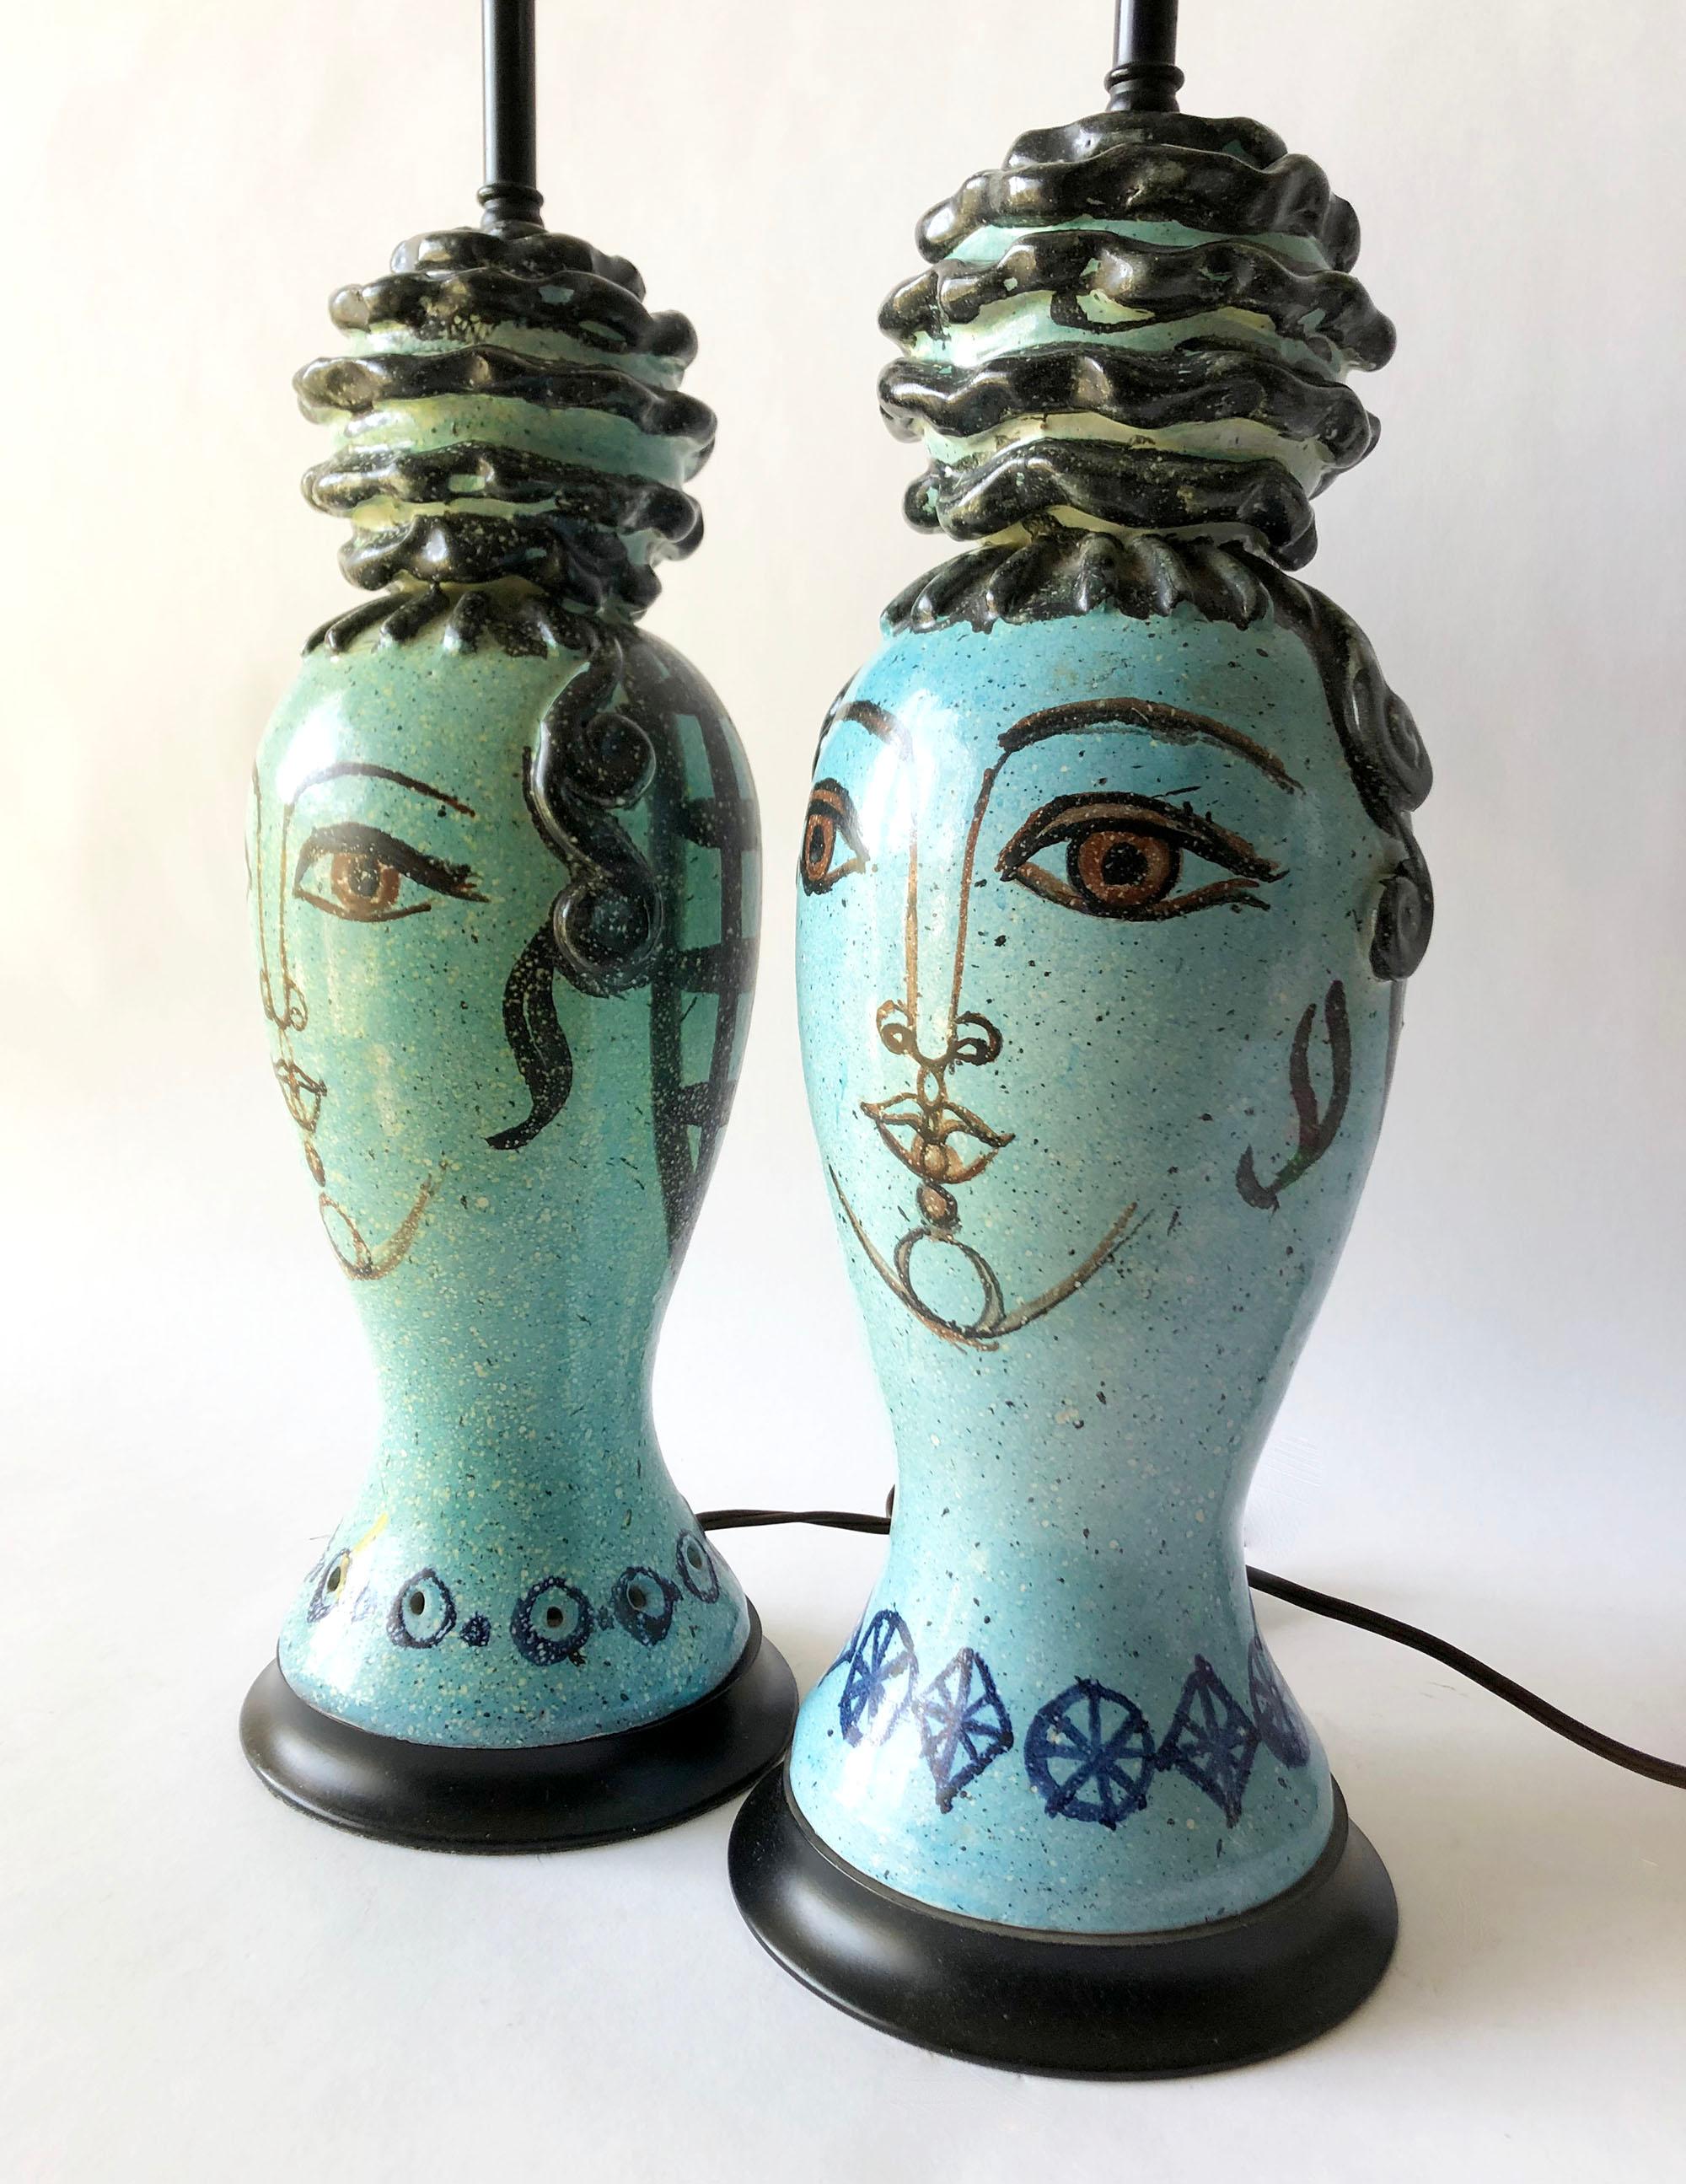 Pair of lamps created by Miguel Durán-Loriga for the Alfaraz workshop of Madrid, Spain. Lamps are hand thrown and decorated with elaborate chignon hair styles of the Spanish Flamenco tradition. Lamps overall measurement is 20